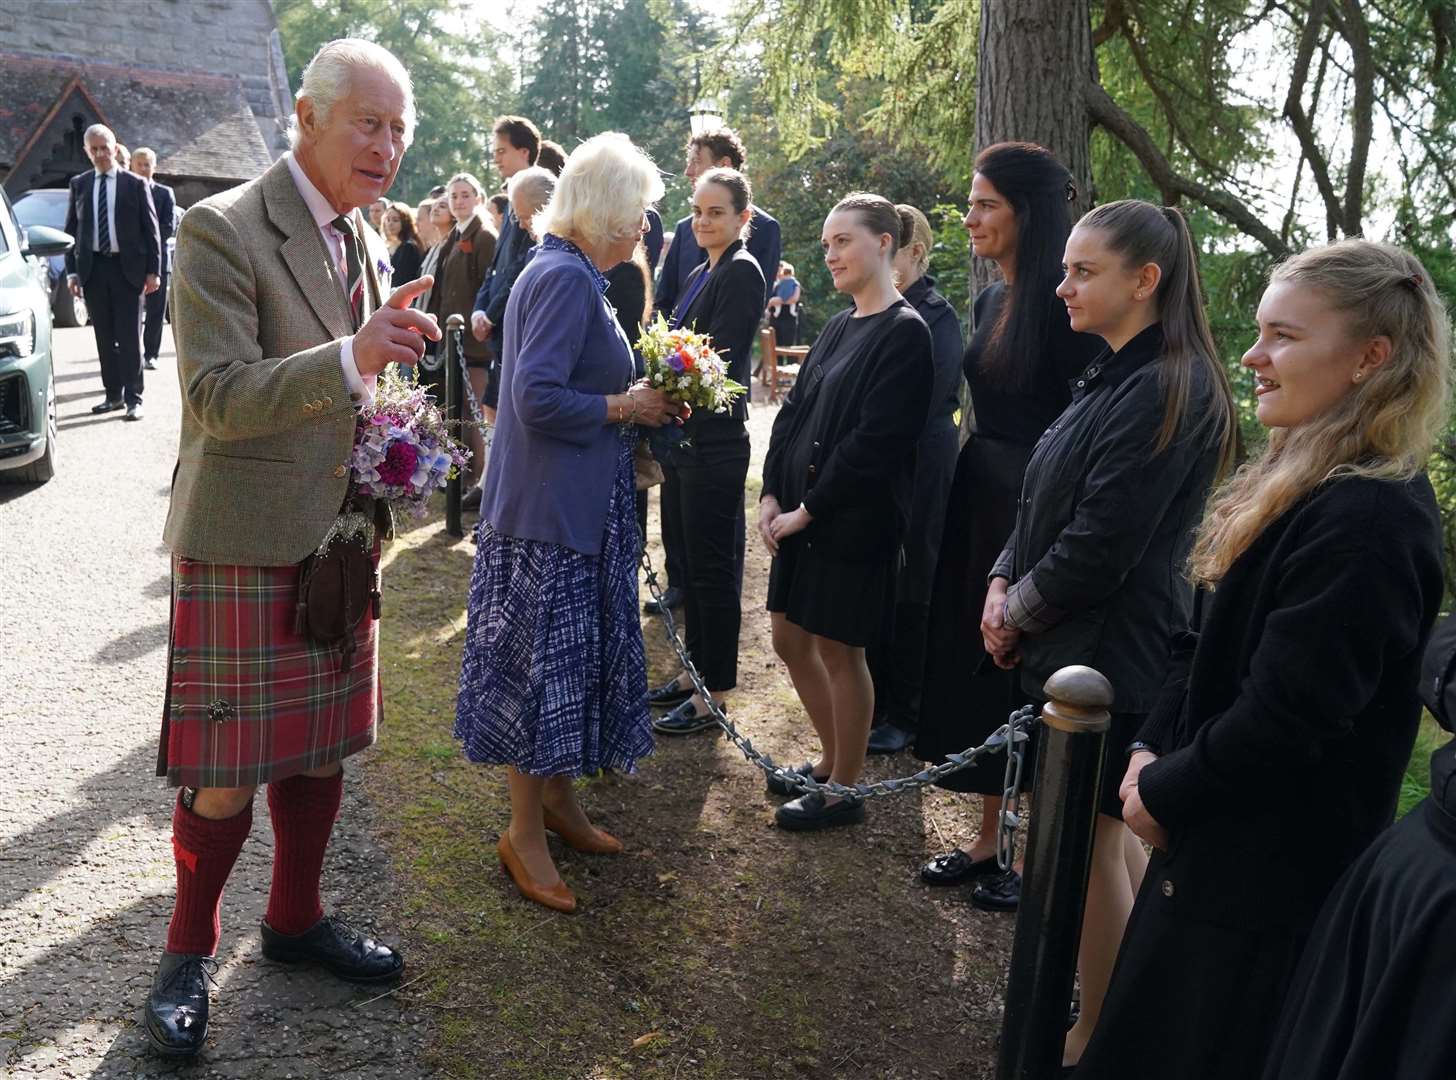 The King and Queen meet estate staff and members of the public after a church service to mark the first anniversary of the death of Queen Elizabeth II (Andrew Milligan/PA)